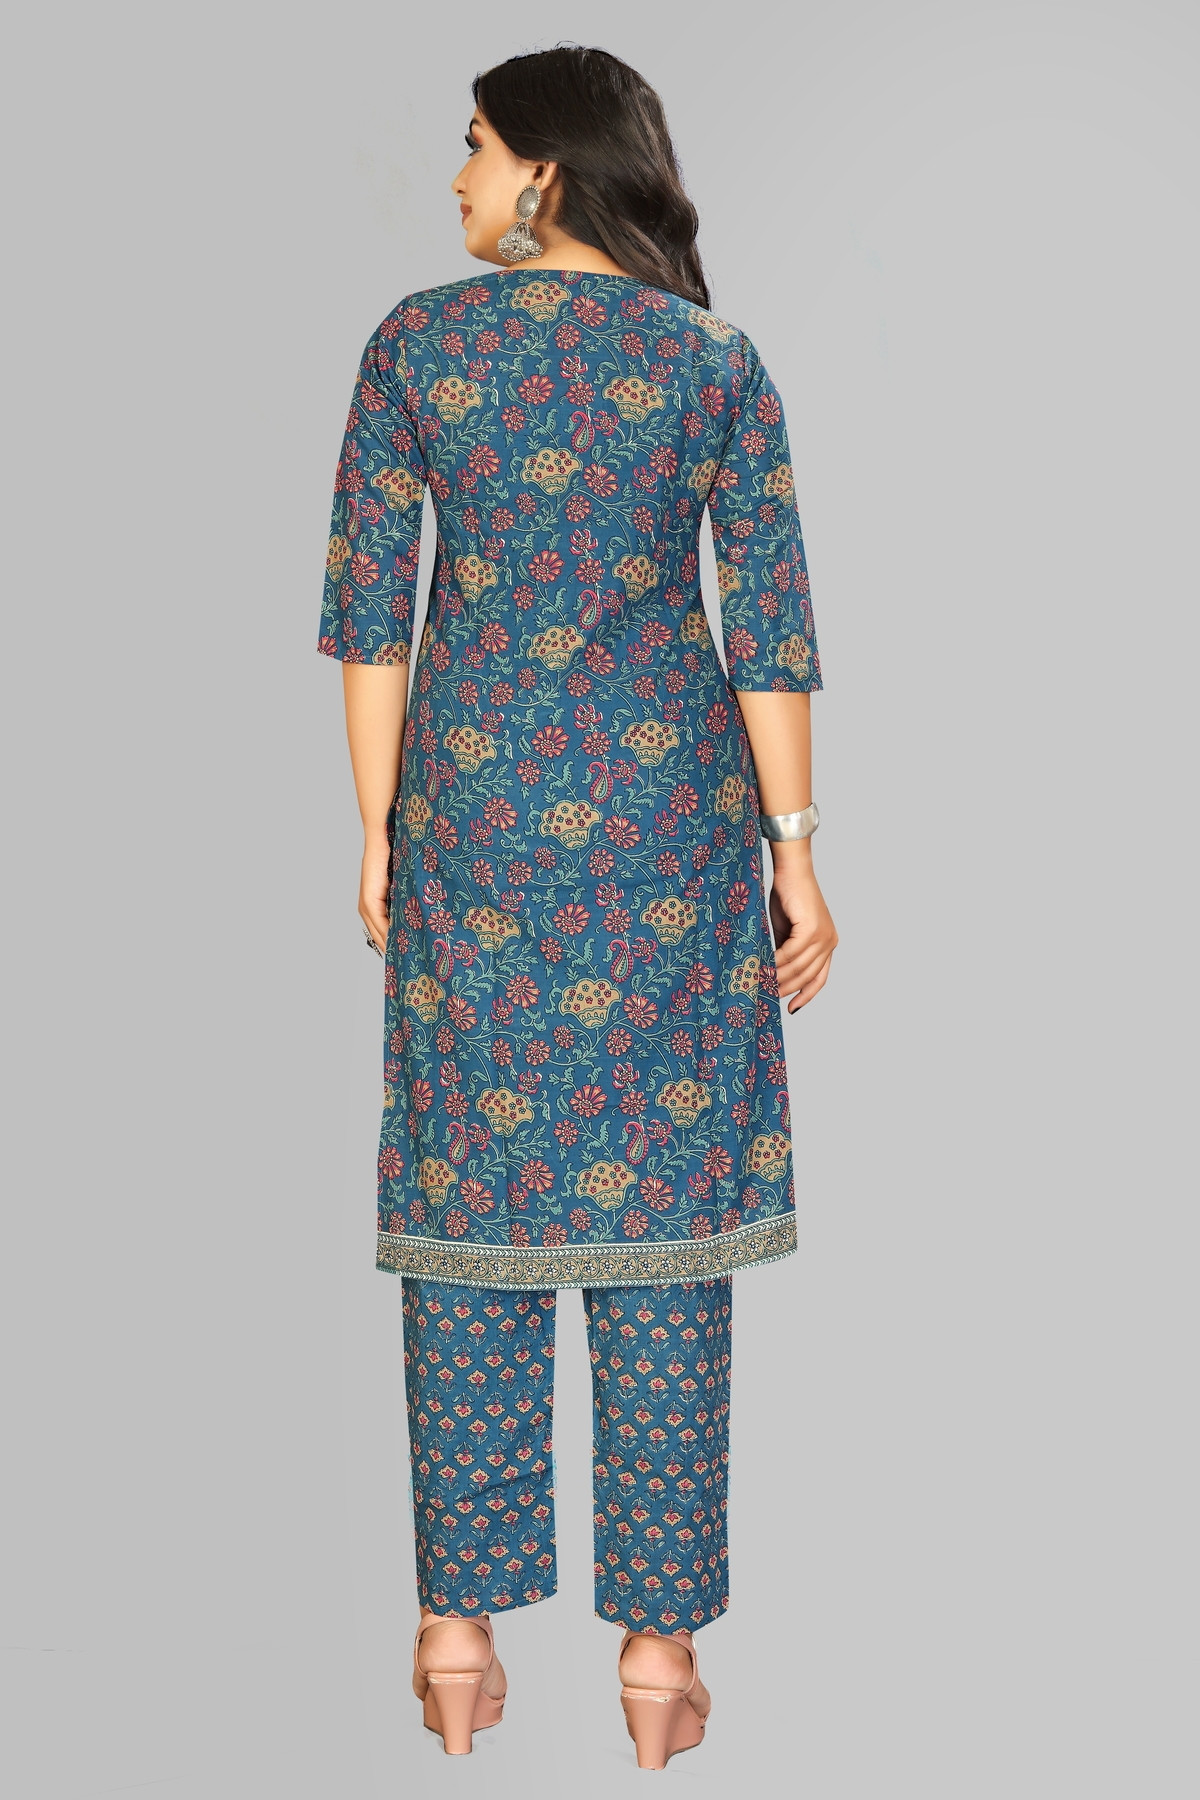 Aaritra Fashion Cotton floral printed Kurti with Pant - Blue